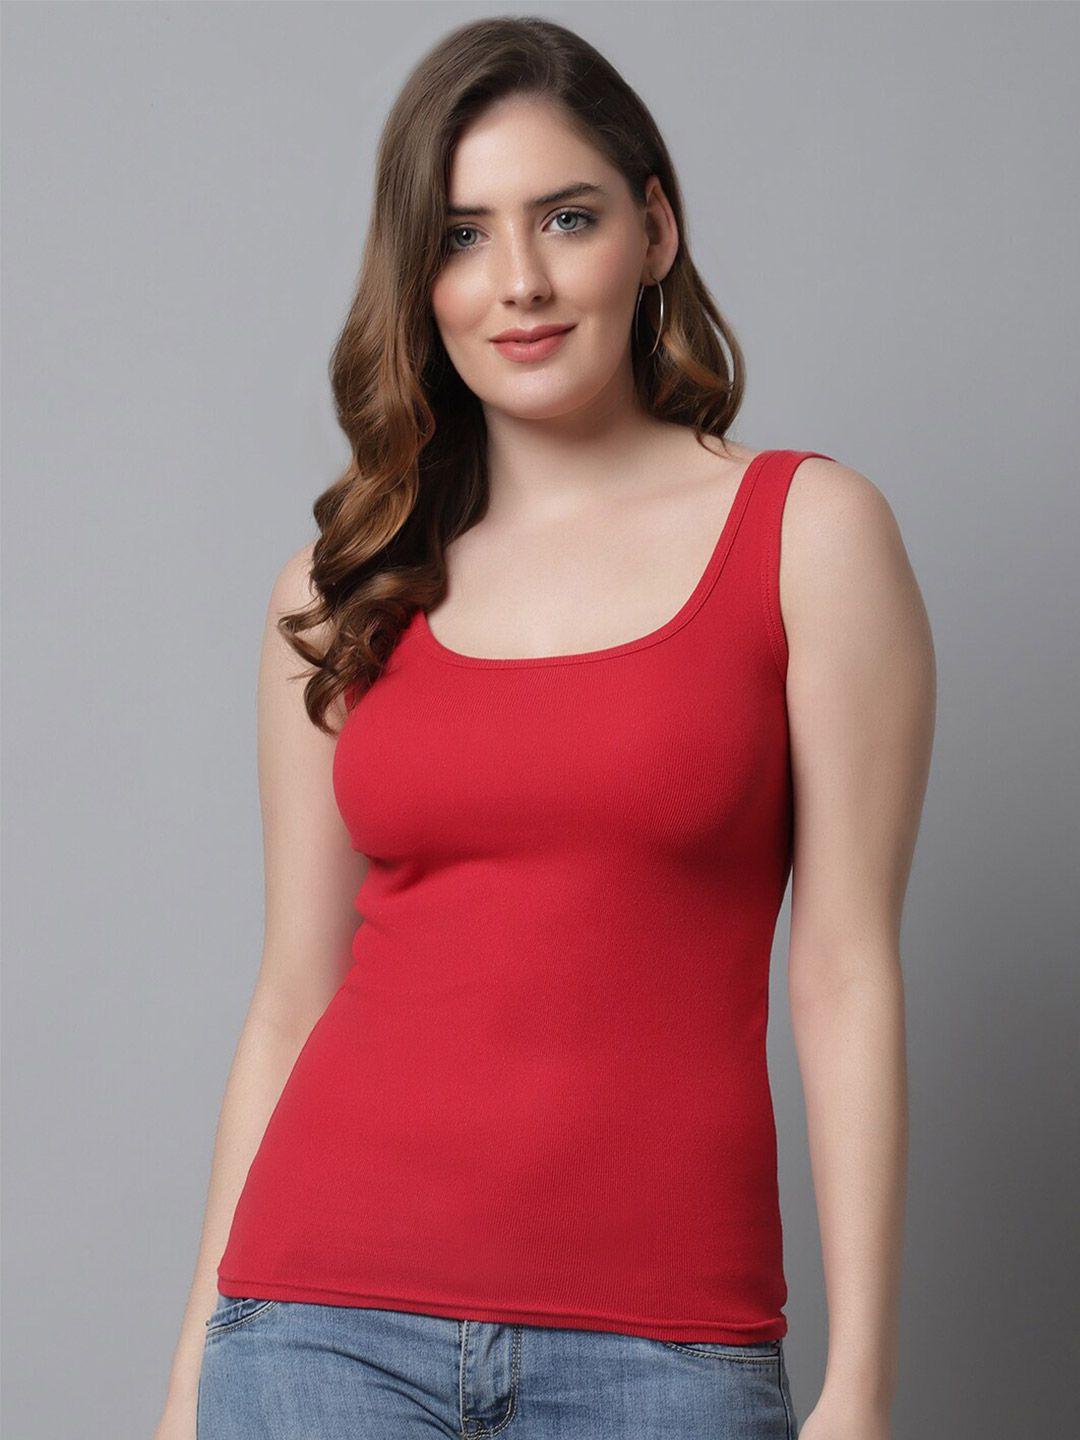 kex red scoop neck sleeveless cotton casual tank top